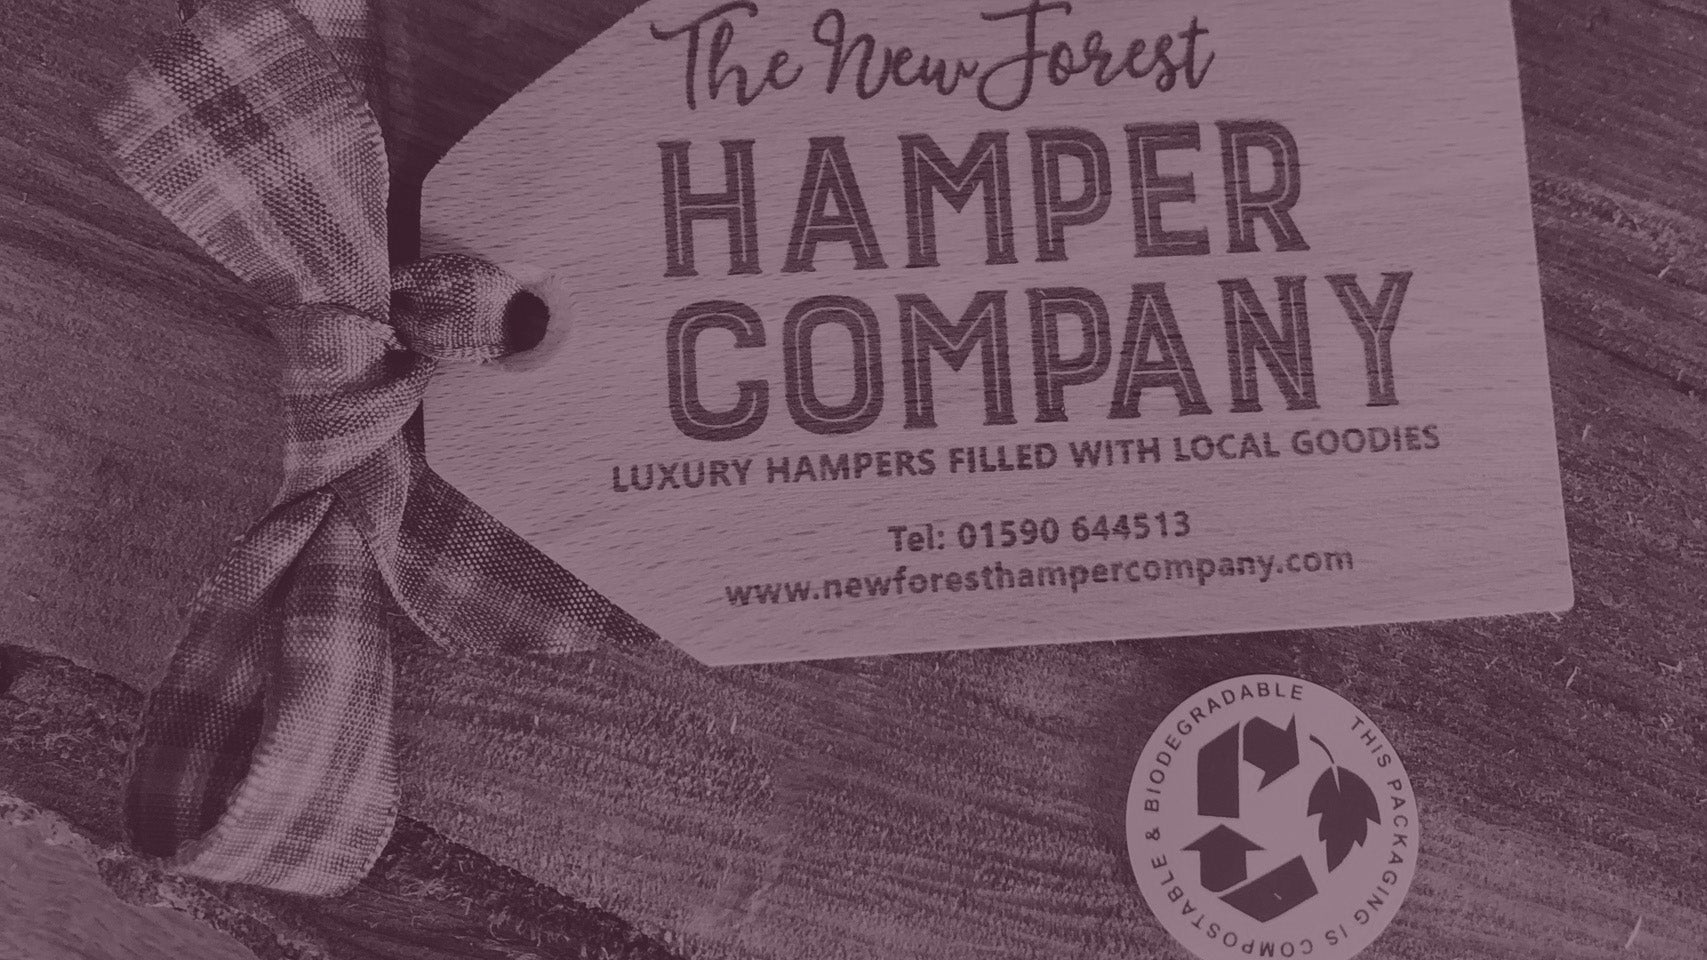 How We Work With… The New Forest Hamper Company